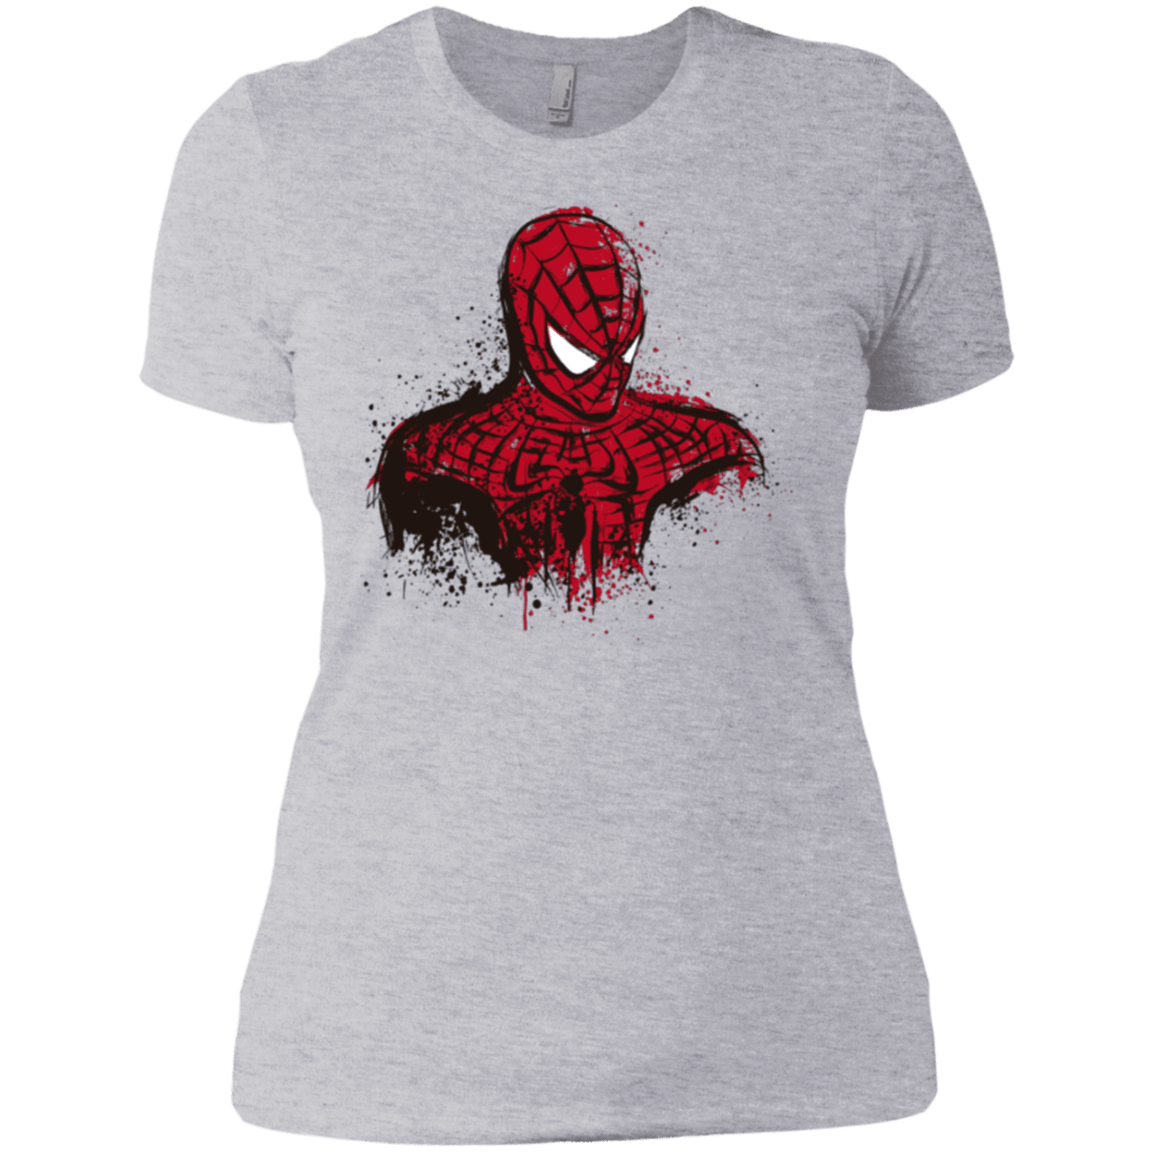 T-Shirts Heather Grey / X-Small Behind The Mask Women's Premium T-Shirt